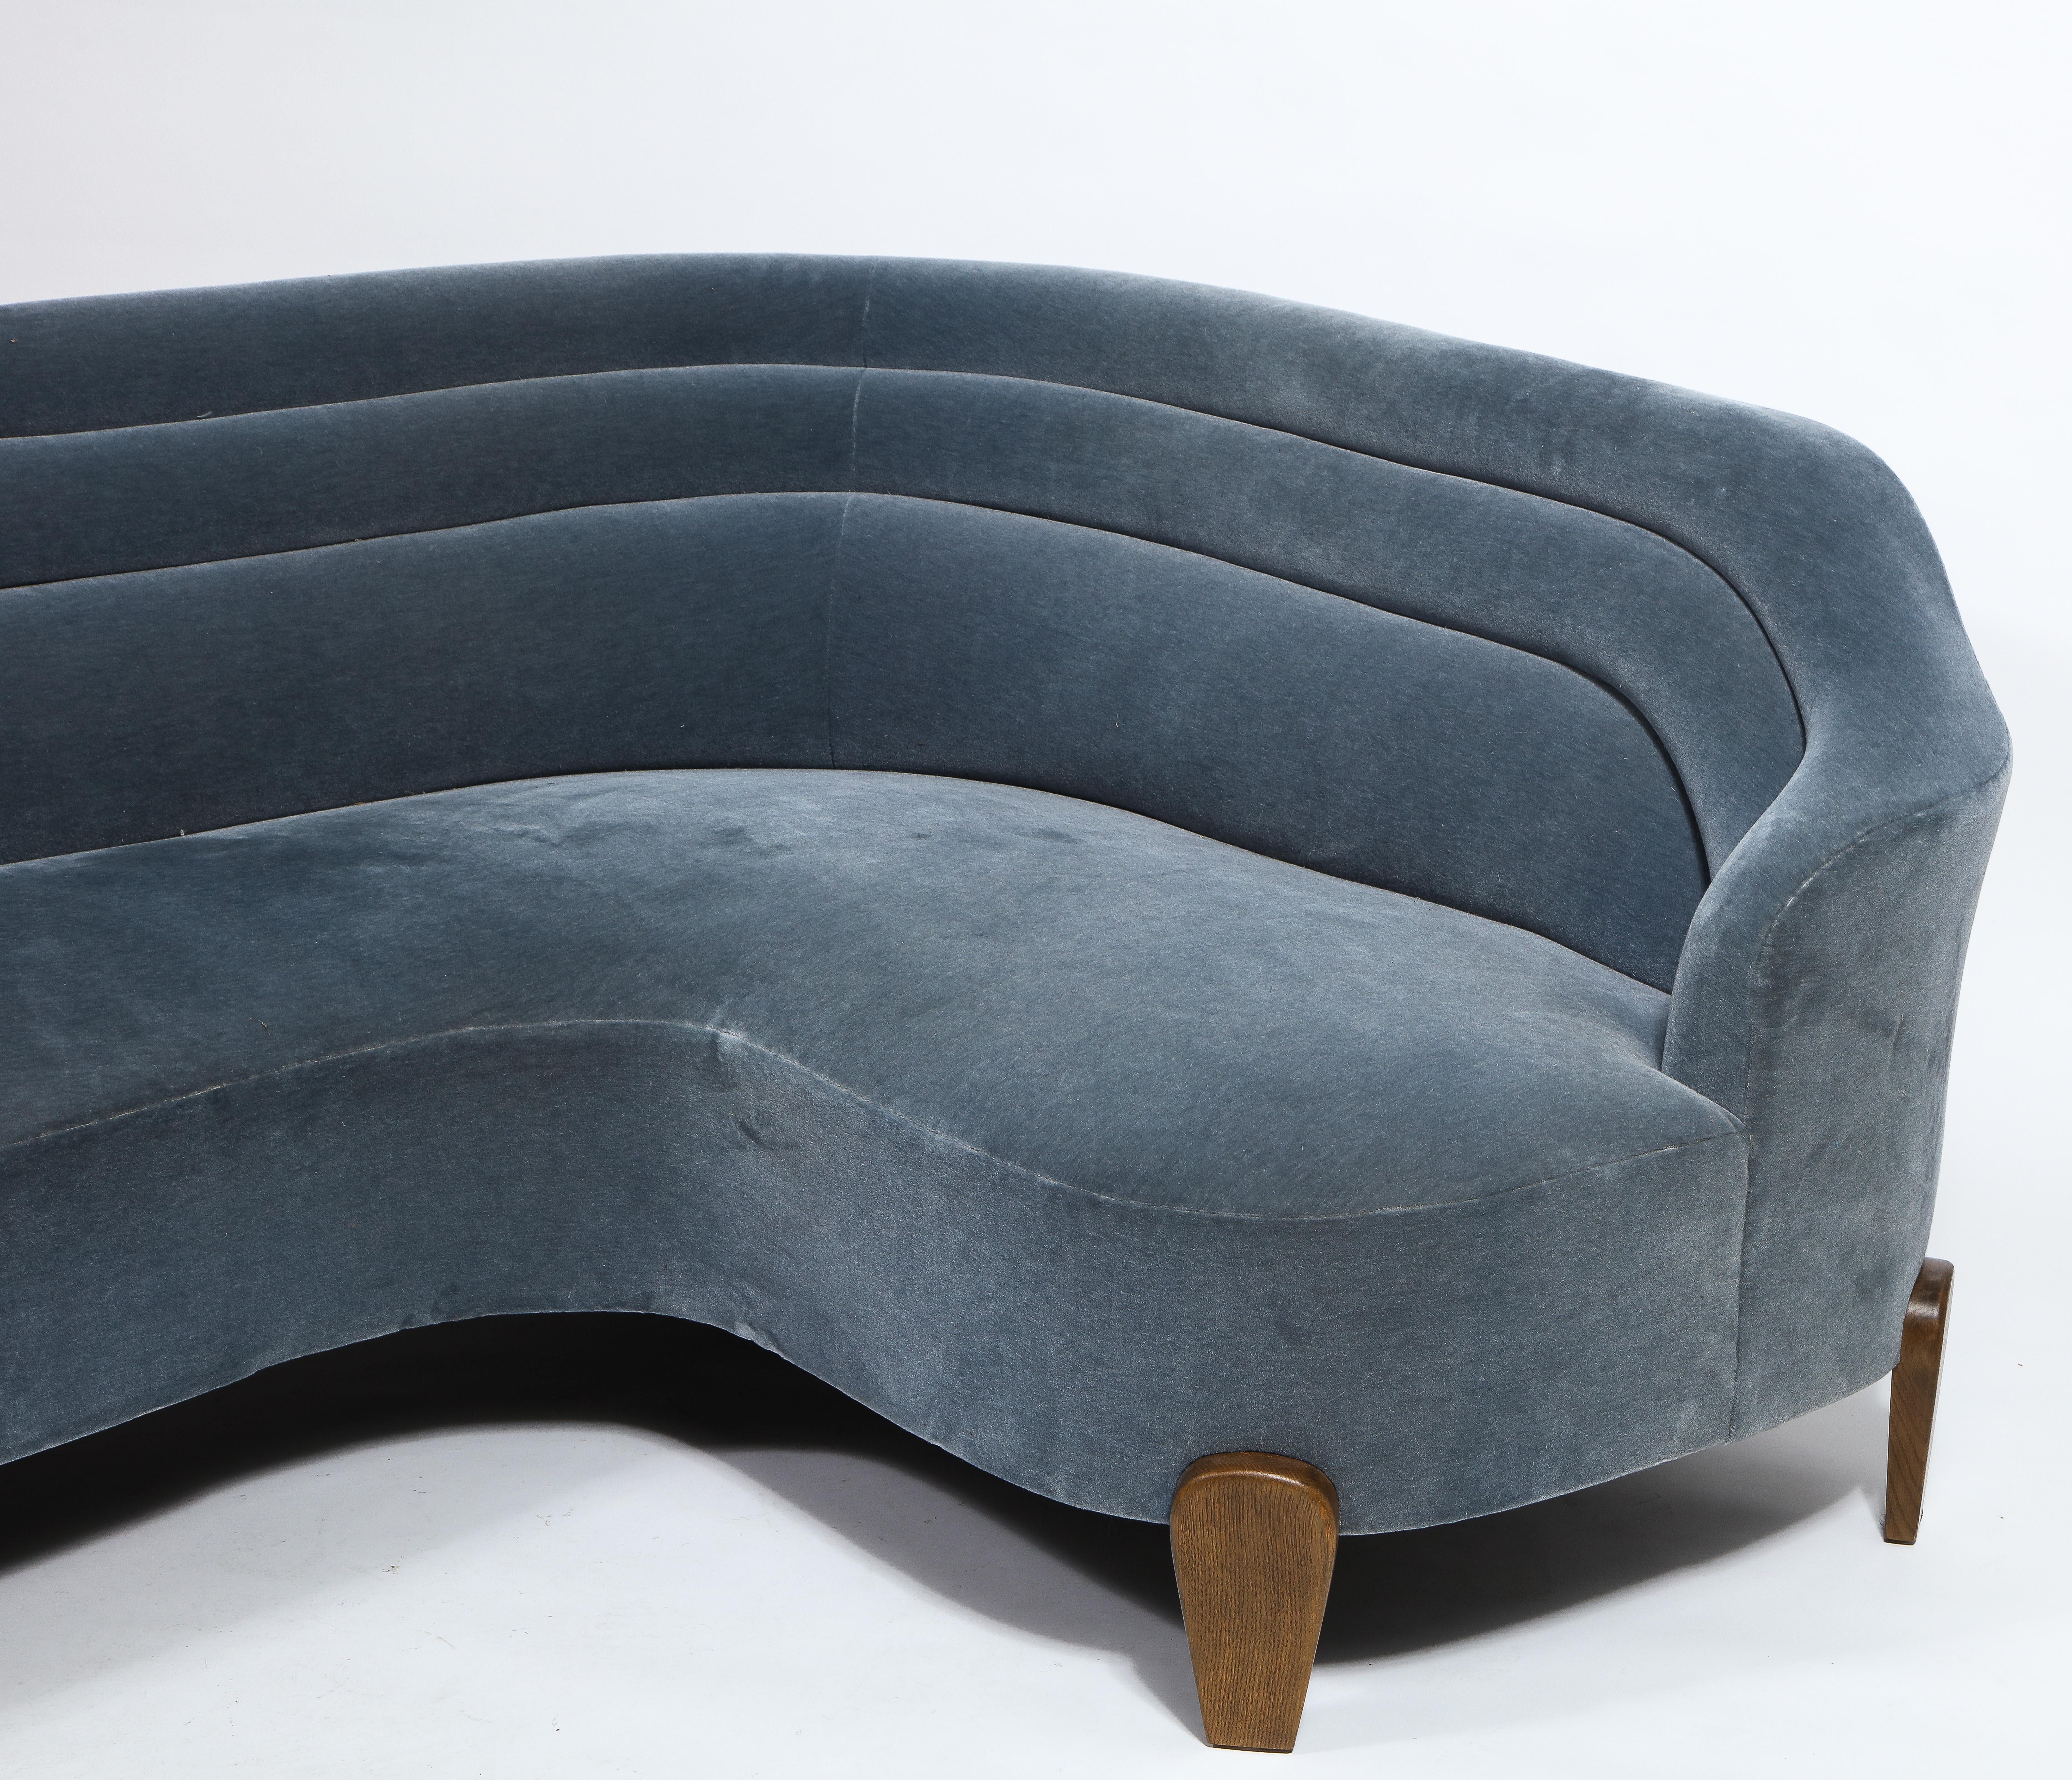 American Curved Sofa by FERRER, USA